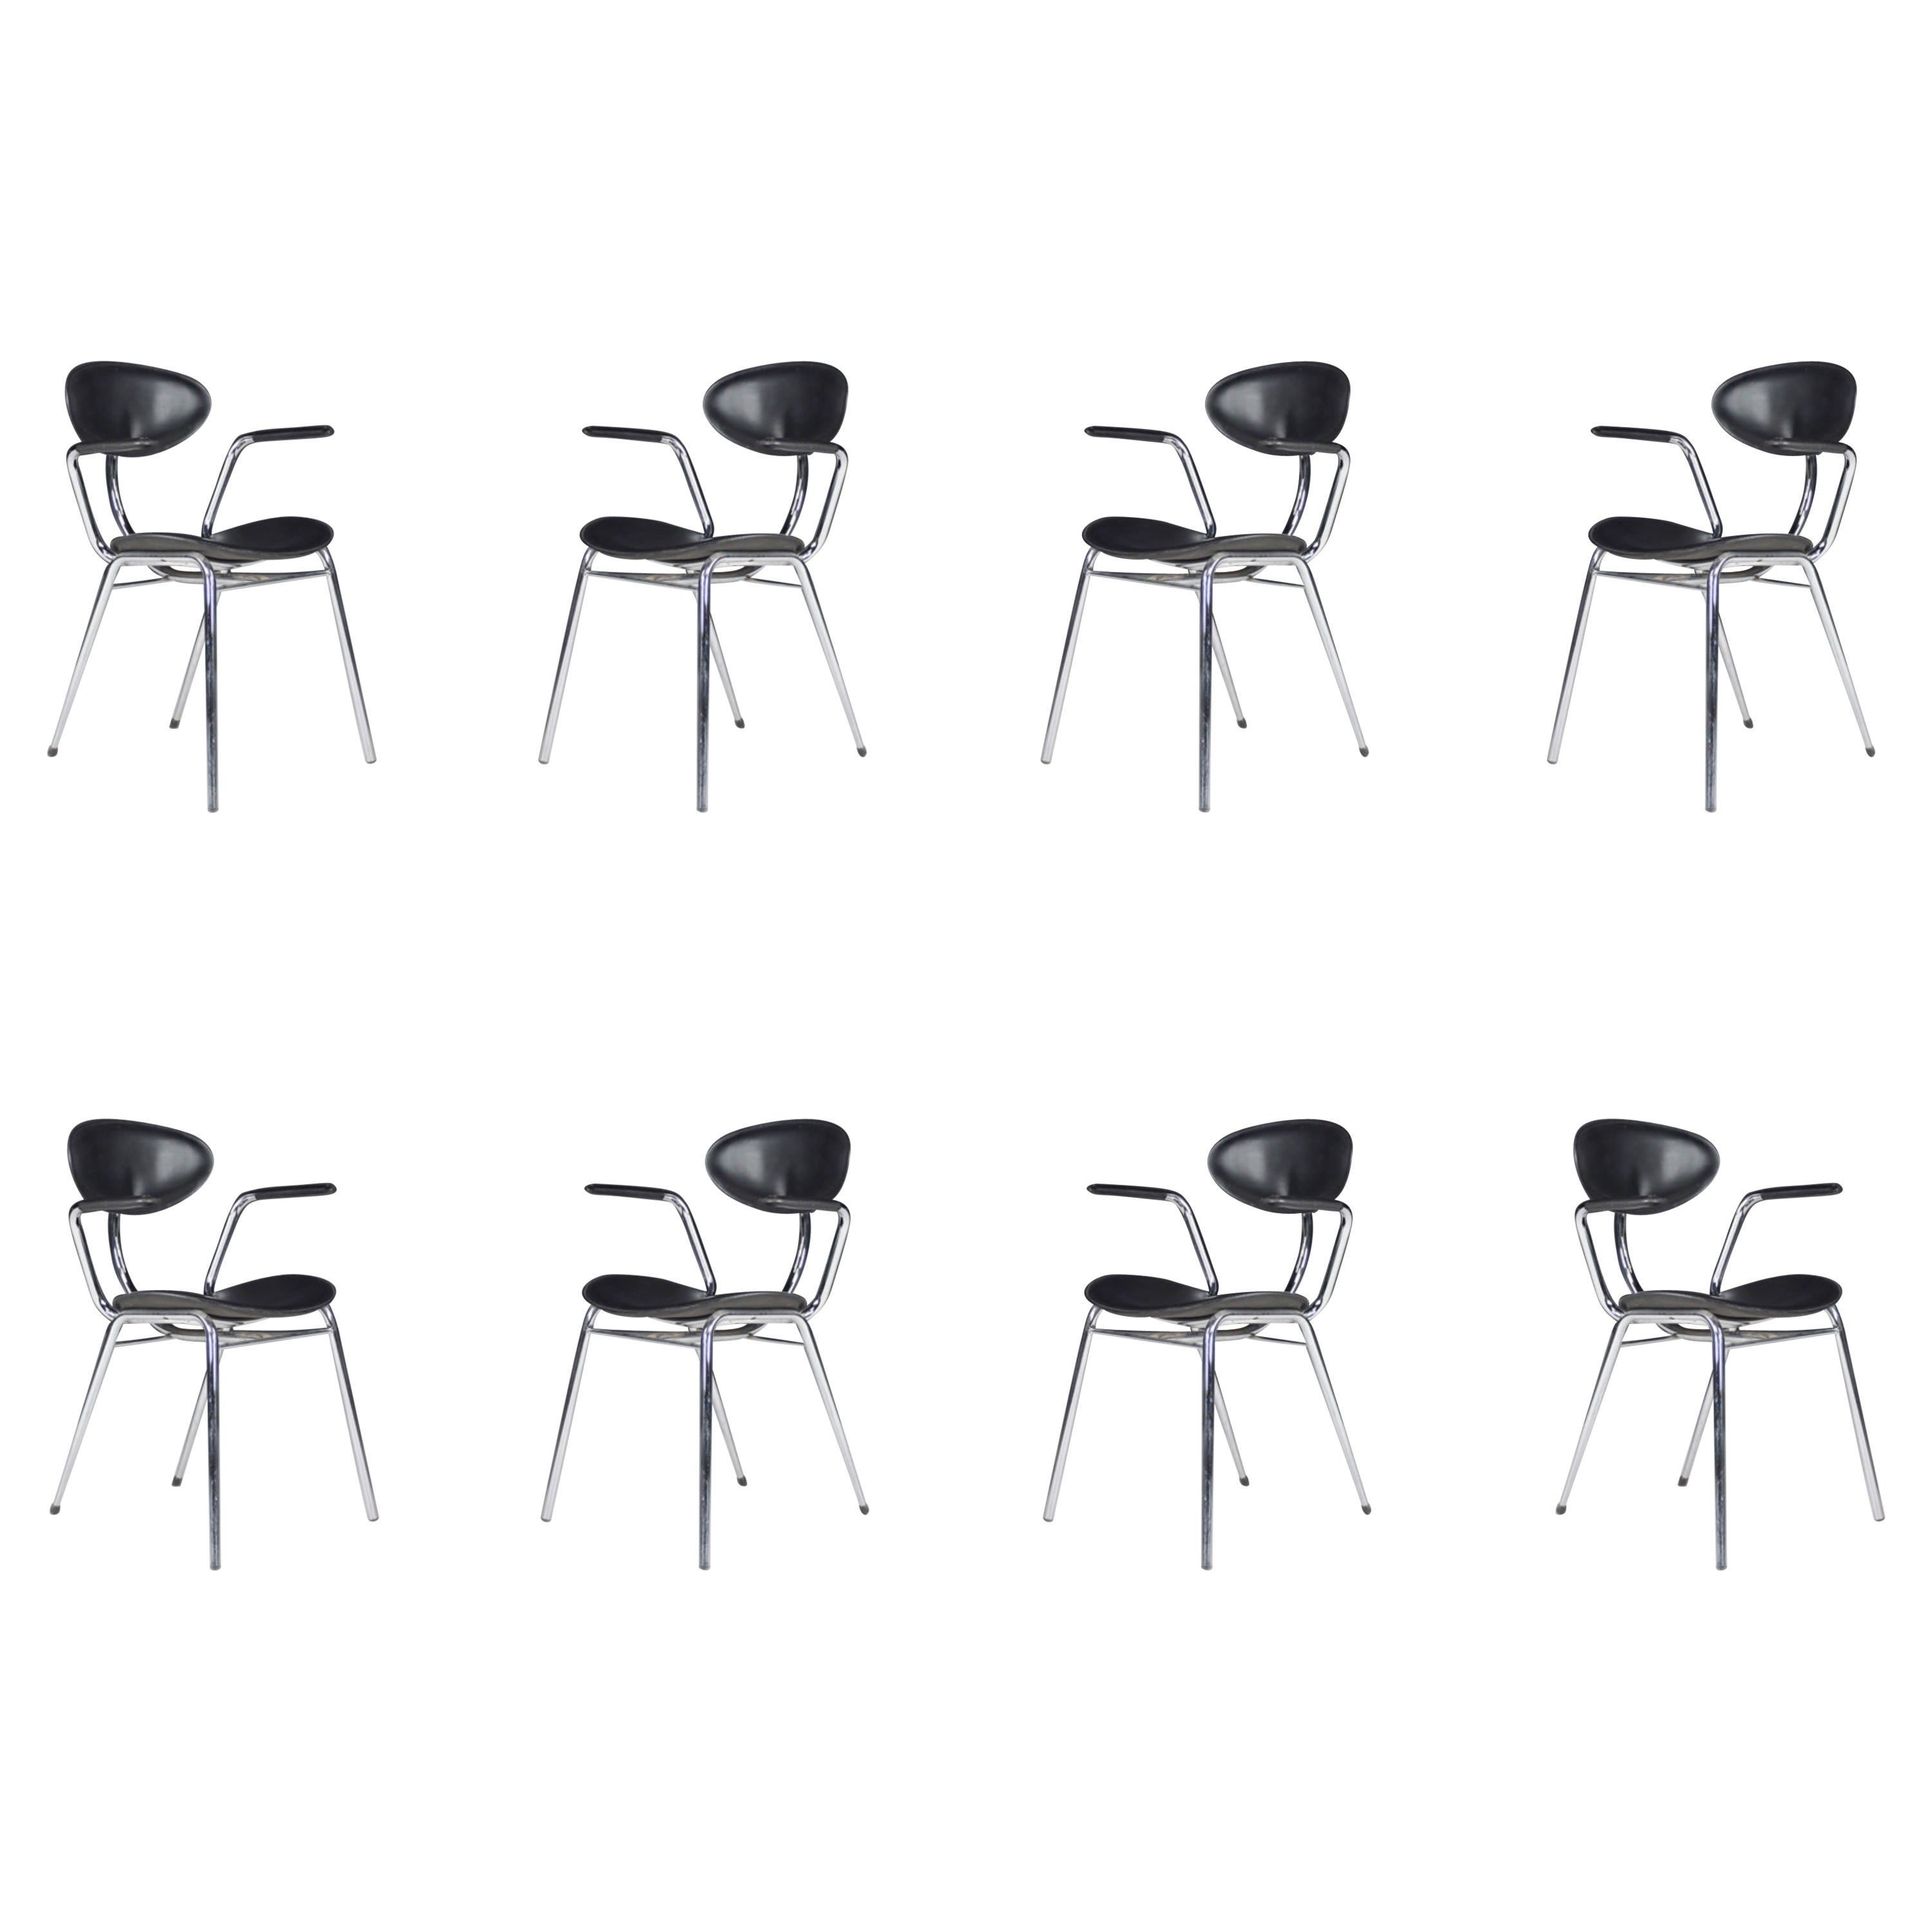 Set of Eight Black Leather and Chrome steel Dining Room Chairs, Italy 1970s For Sale